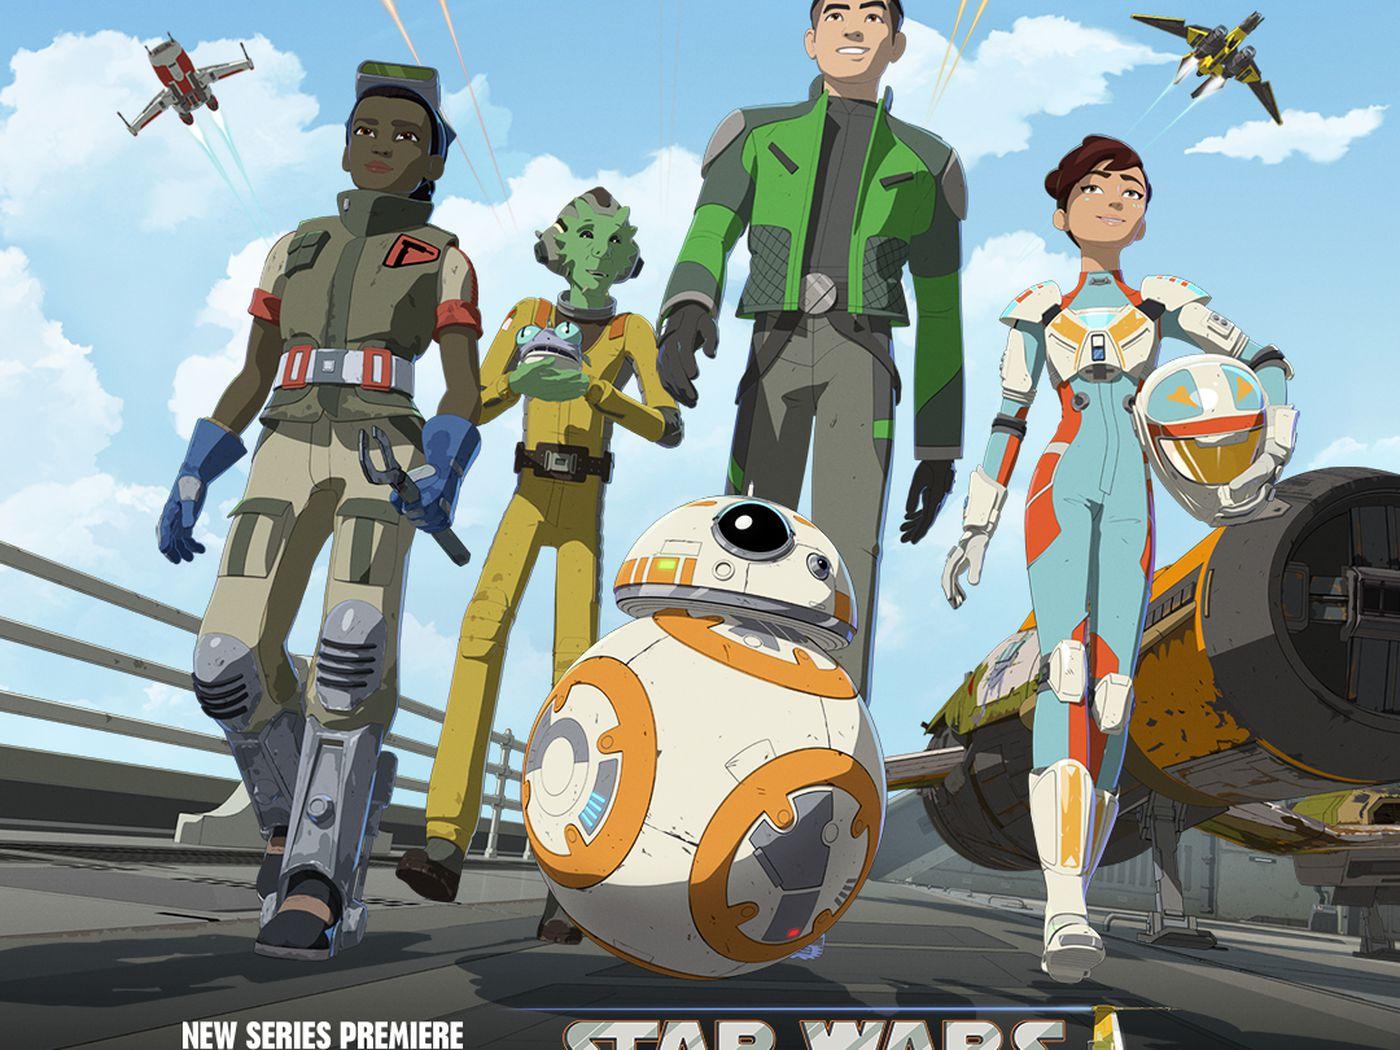 All the updates for Disney’s next Star Wars animated show, Star Wars